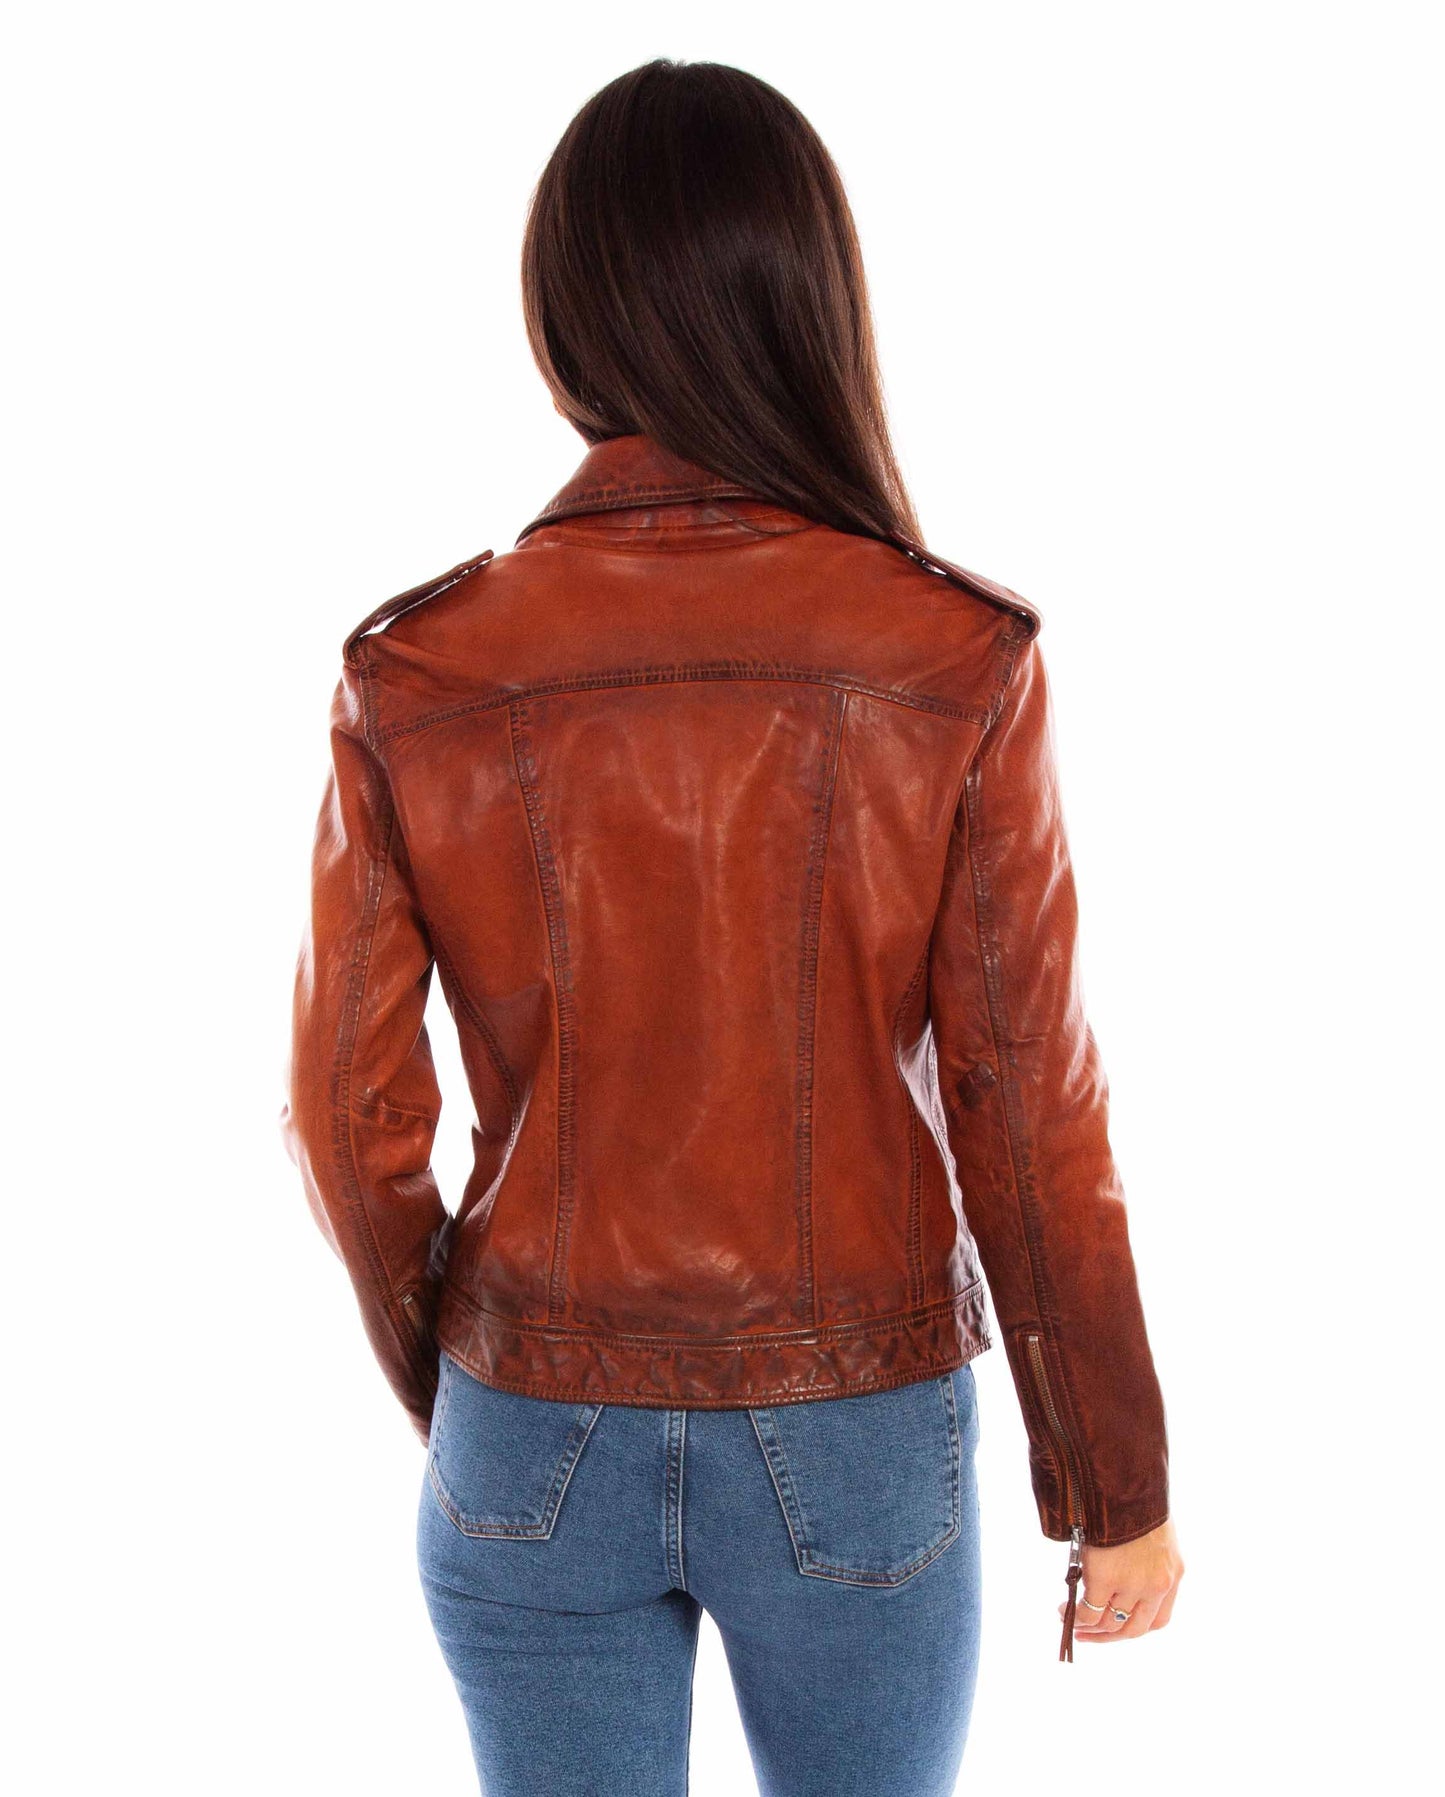 Vintage Brown Leather Motorcycle Jacket at Bourbon Cowgirl